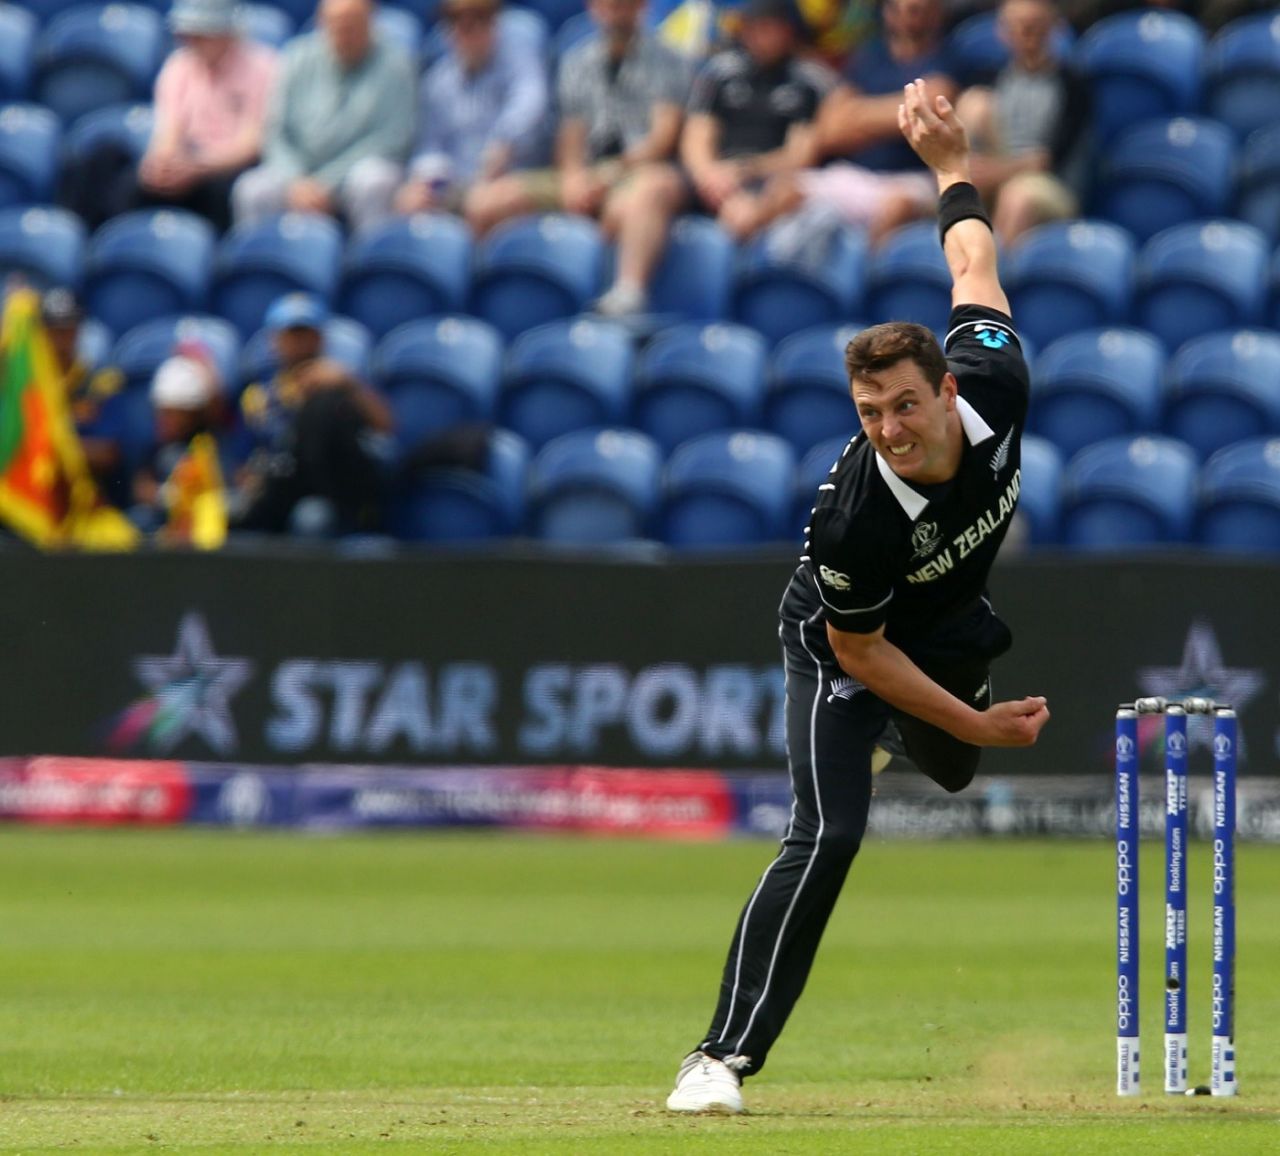 Matt Henry in his delivery follow-through, New Zealand v Sri Lanka, World Cup 2019, Cardiff, June 1, 2019